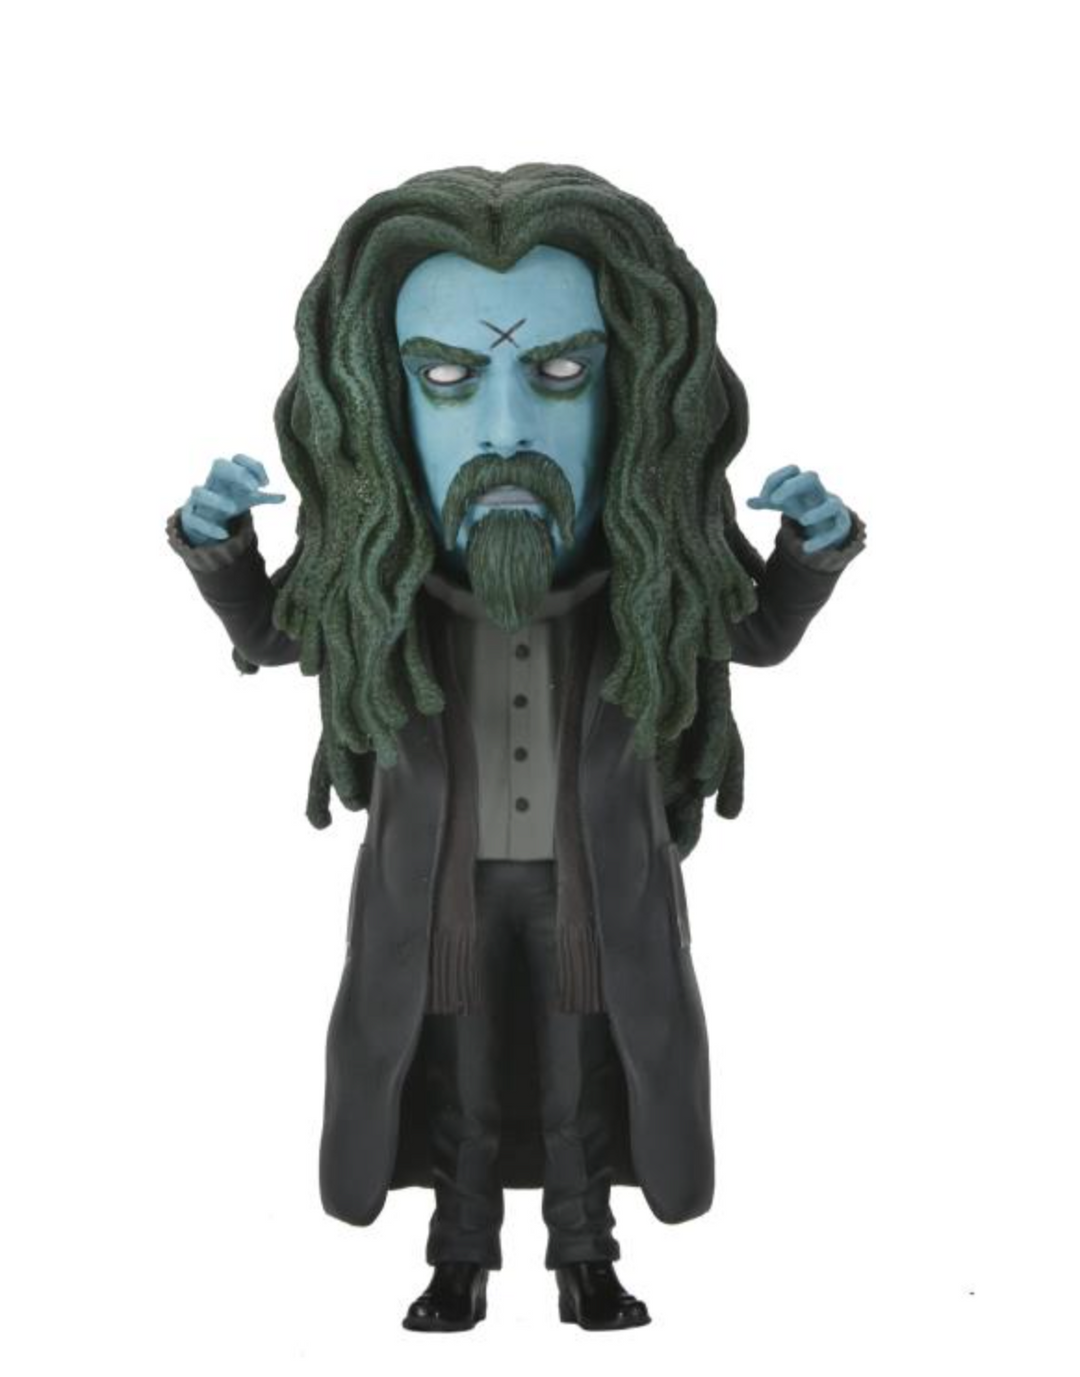 Rob Zombie Hellbilly Deluxe 25th Anniversary Little Big Head Figure